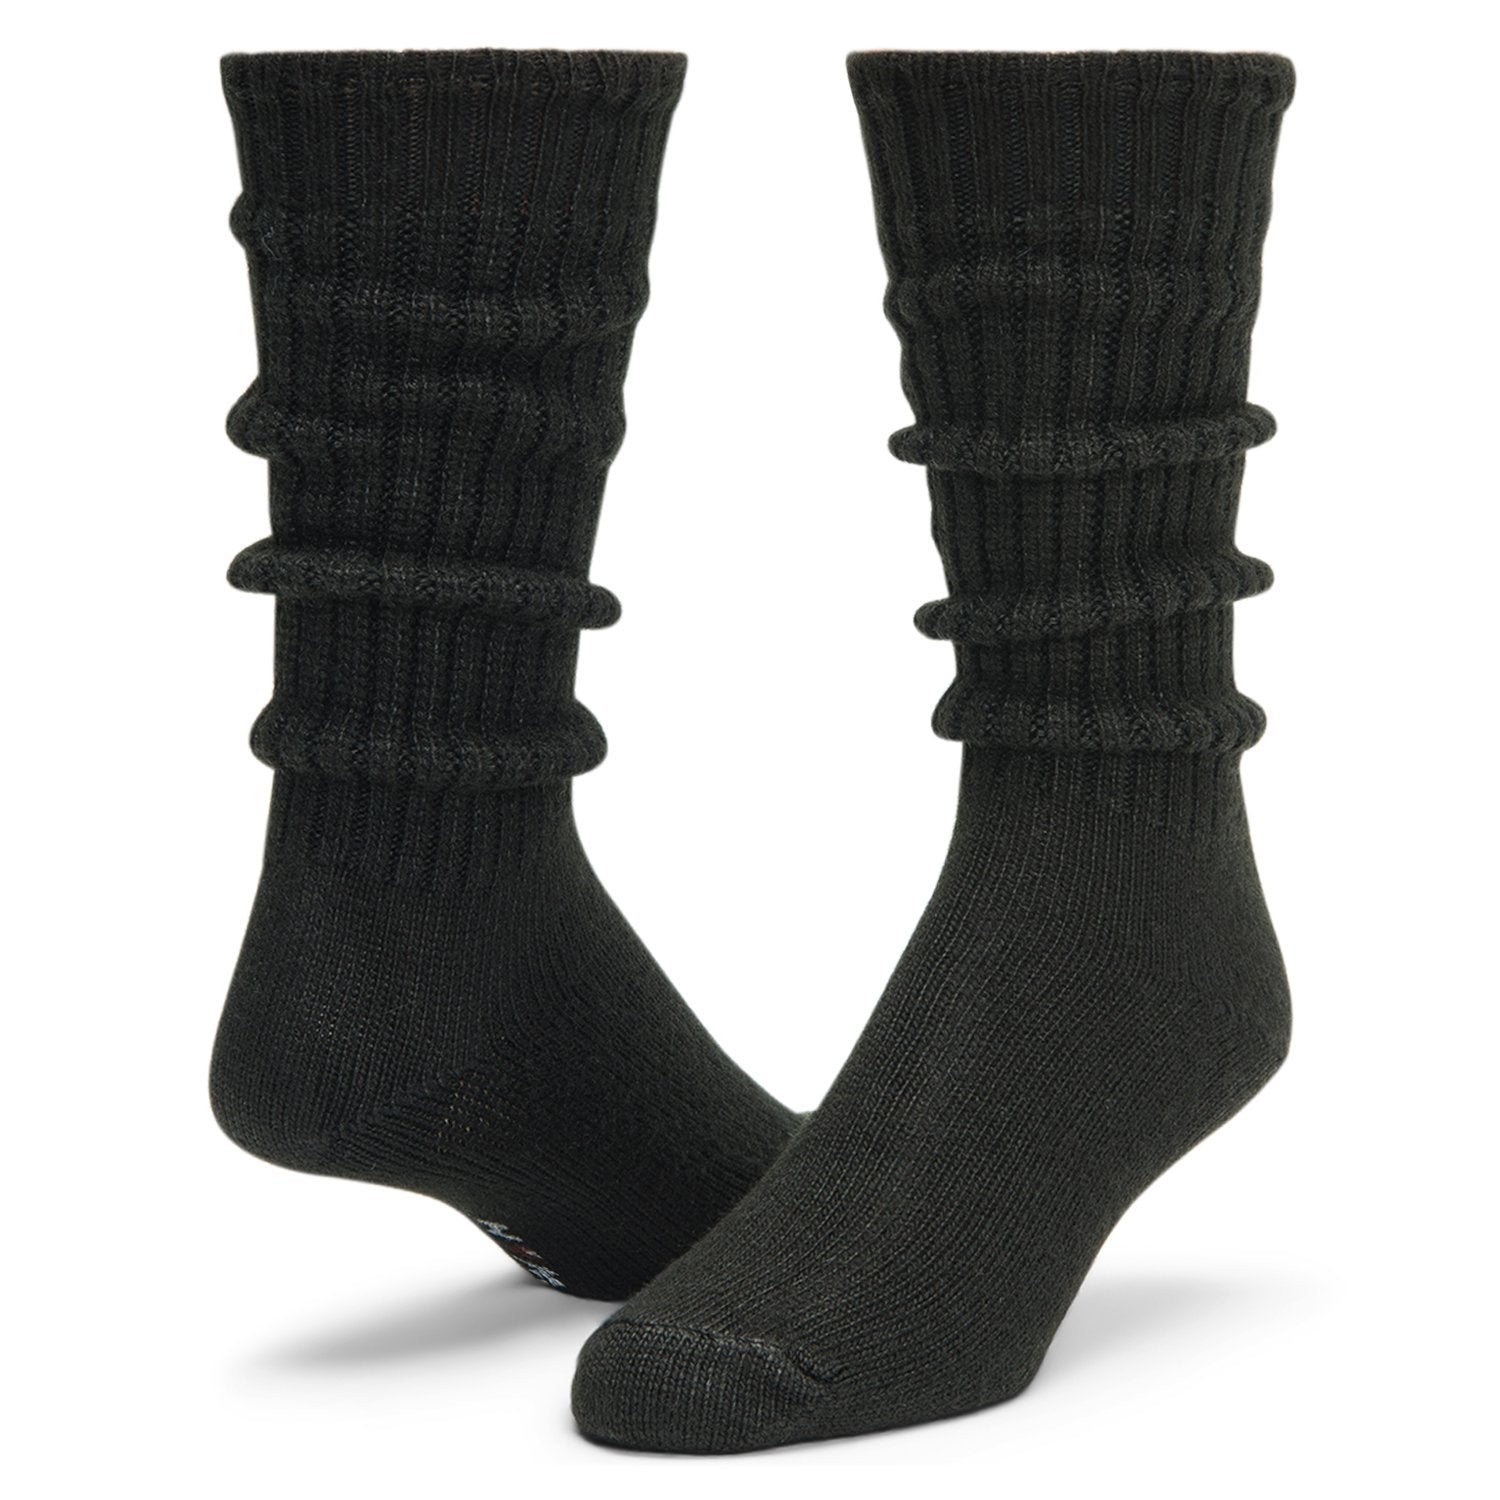 622 Sock - Black full product perspective - made in The USA Wigwam Socks